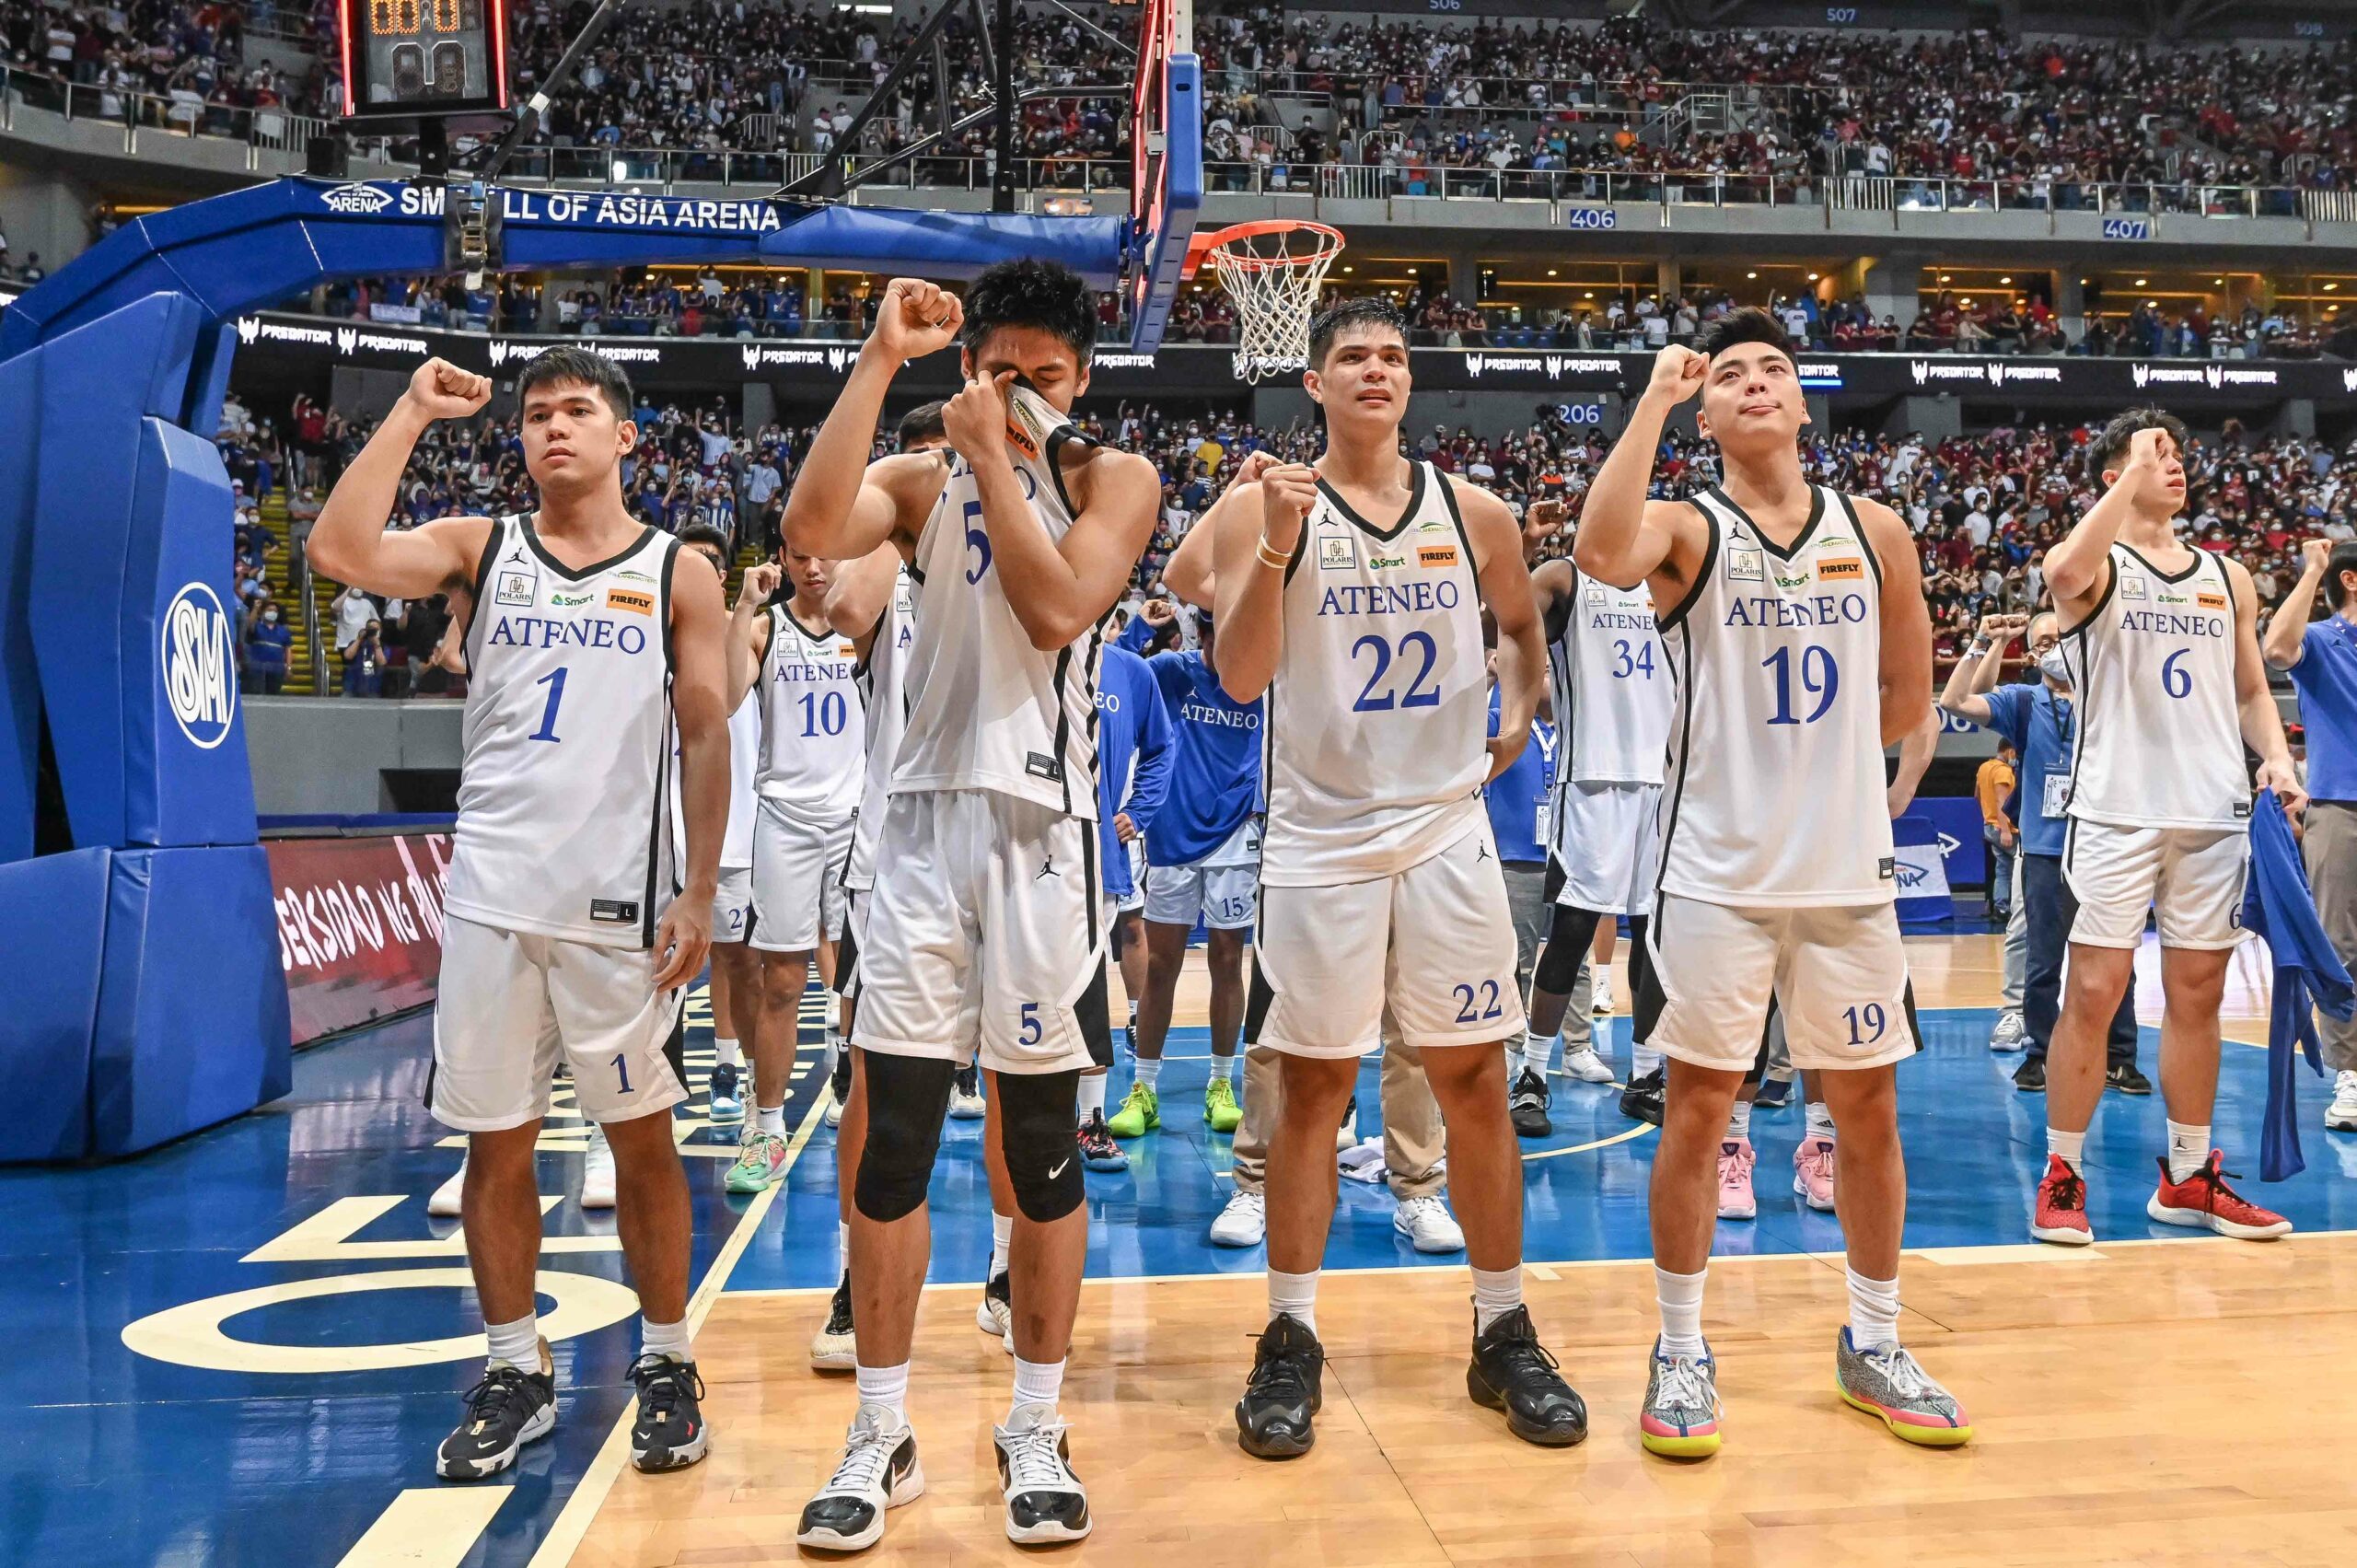 UAAP-84-Mens-Basketball-Ateneo-vs-UP-Ateneo-3-scaled UAAP 84: Cagulangan ends UP's 36-year title drought, Ateneo's dynasty ADMU Basketball News UAAP UP  - philippine sports news